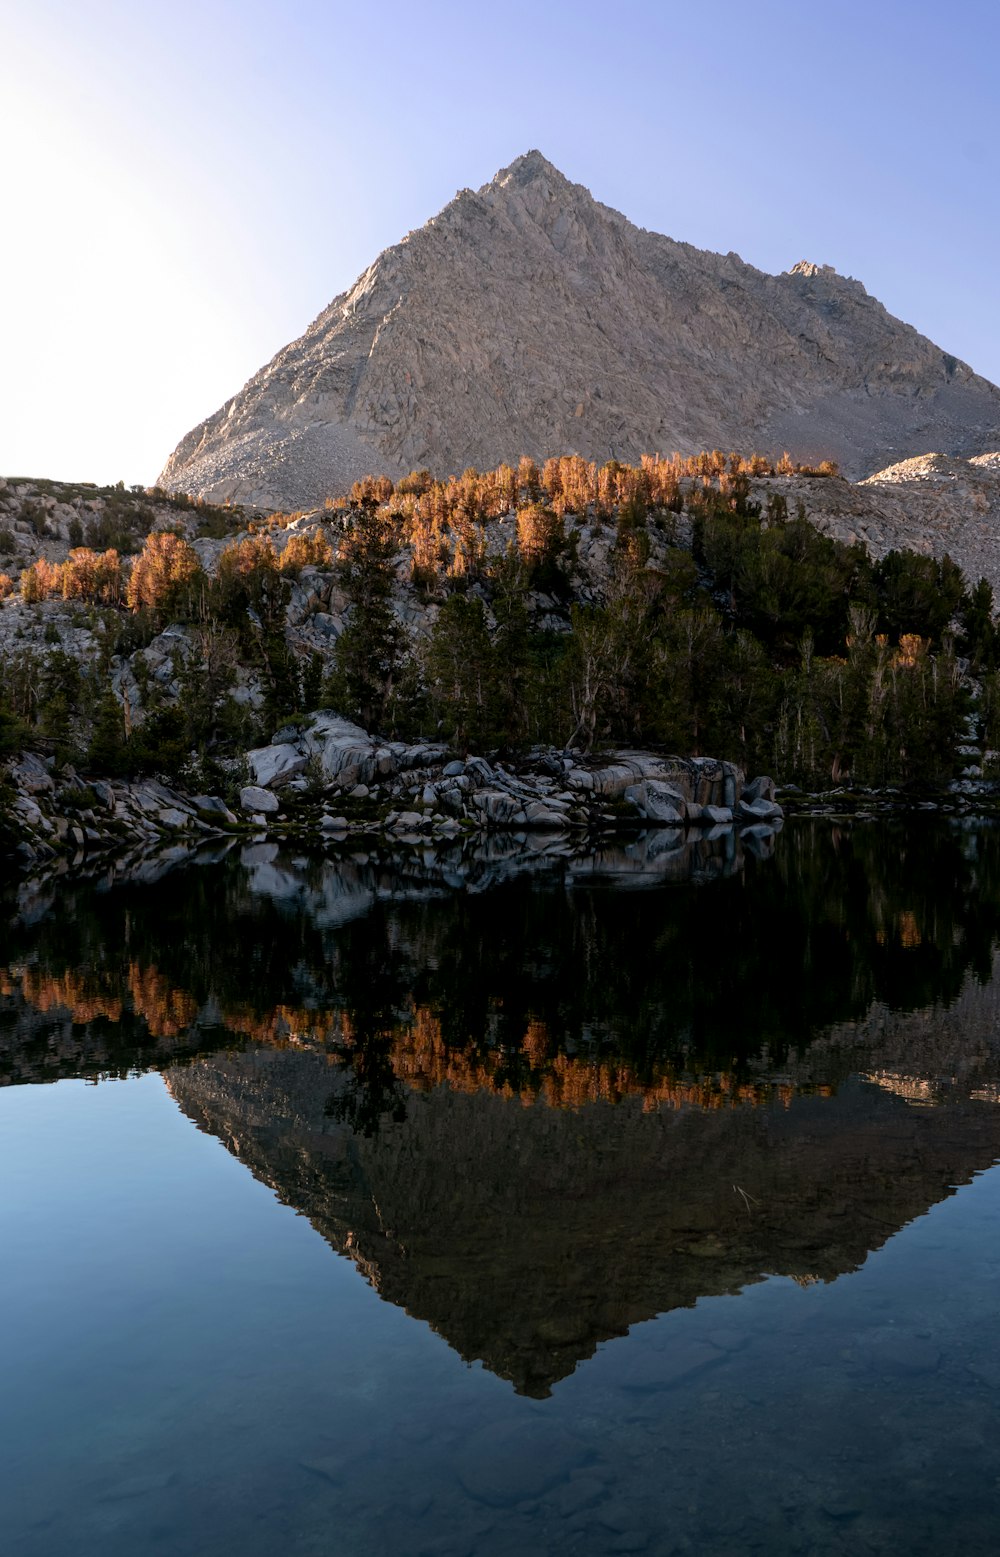 a mountain with trees and a body of water below